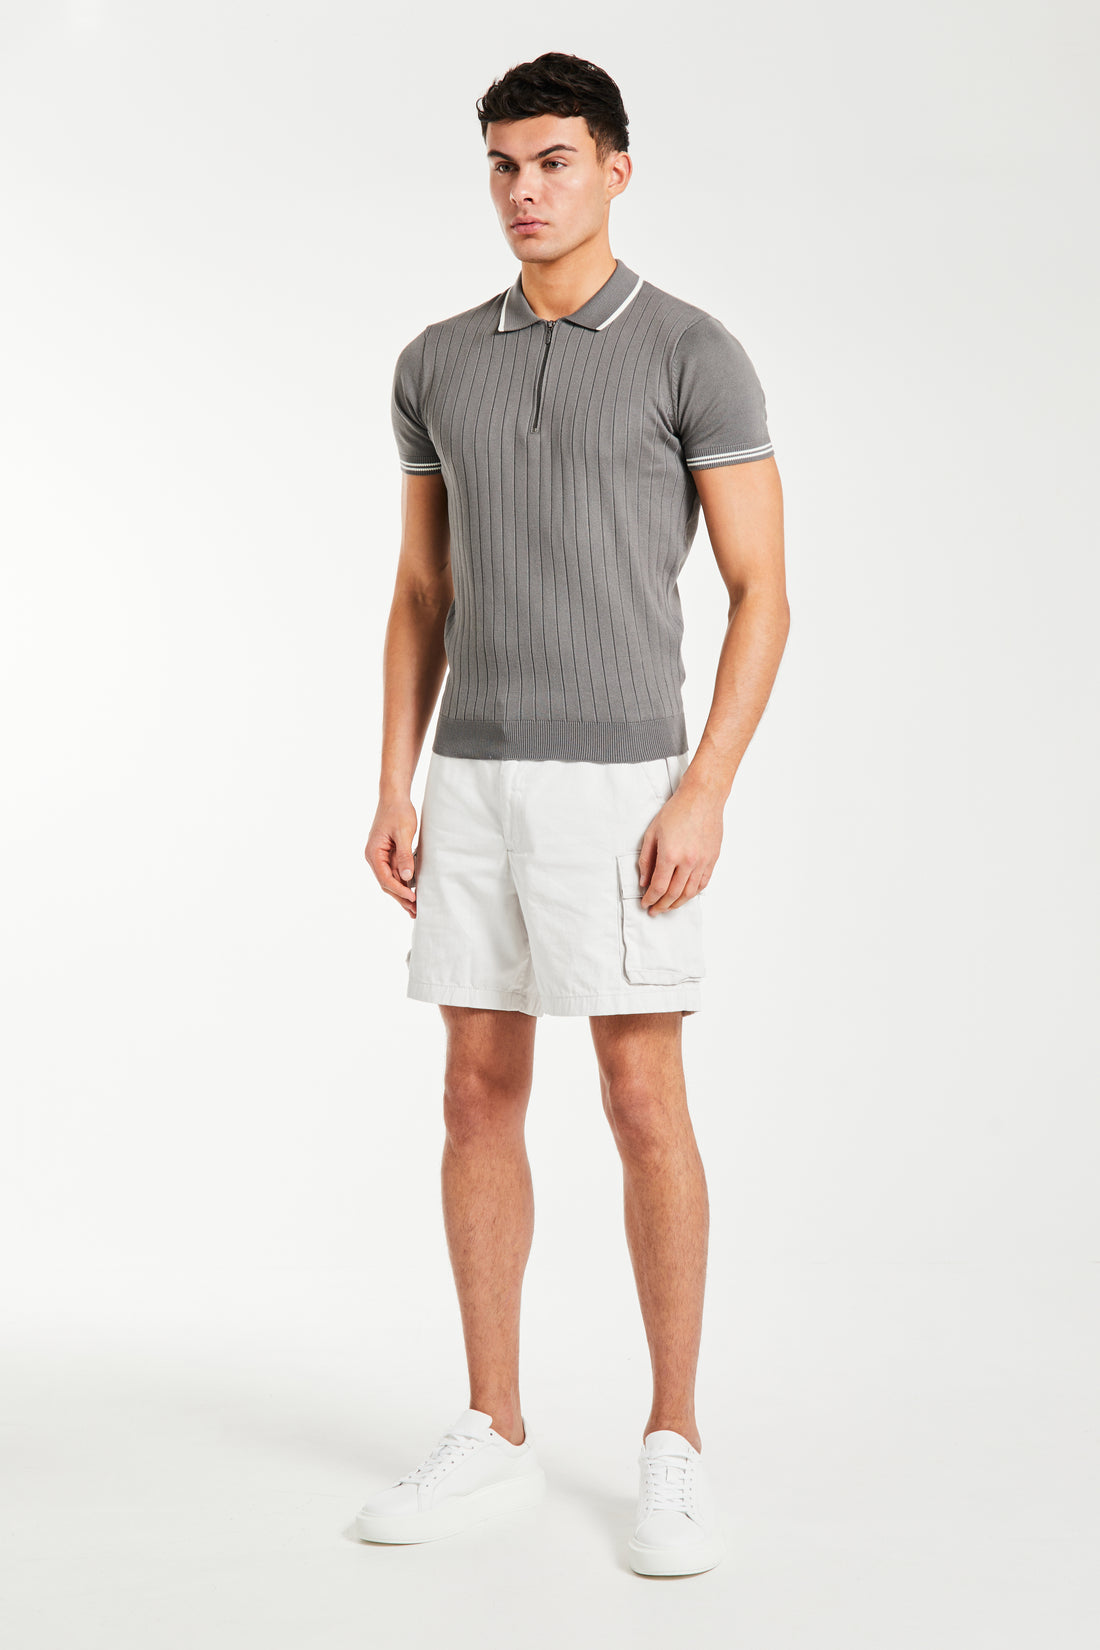 men's utility shorts in white paired with a grey polo